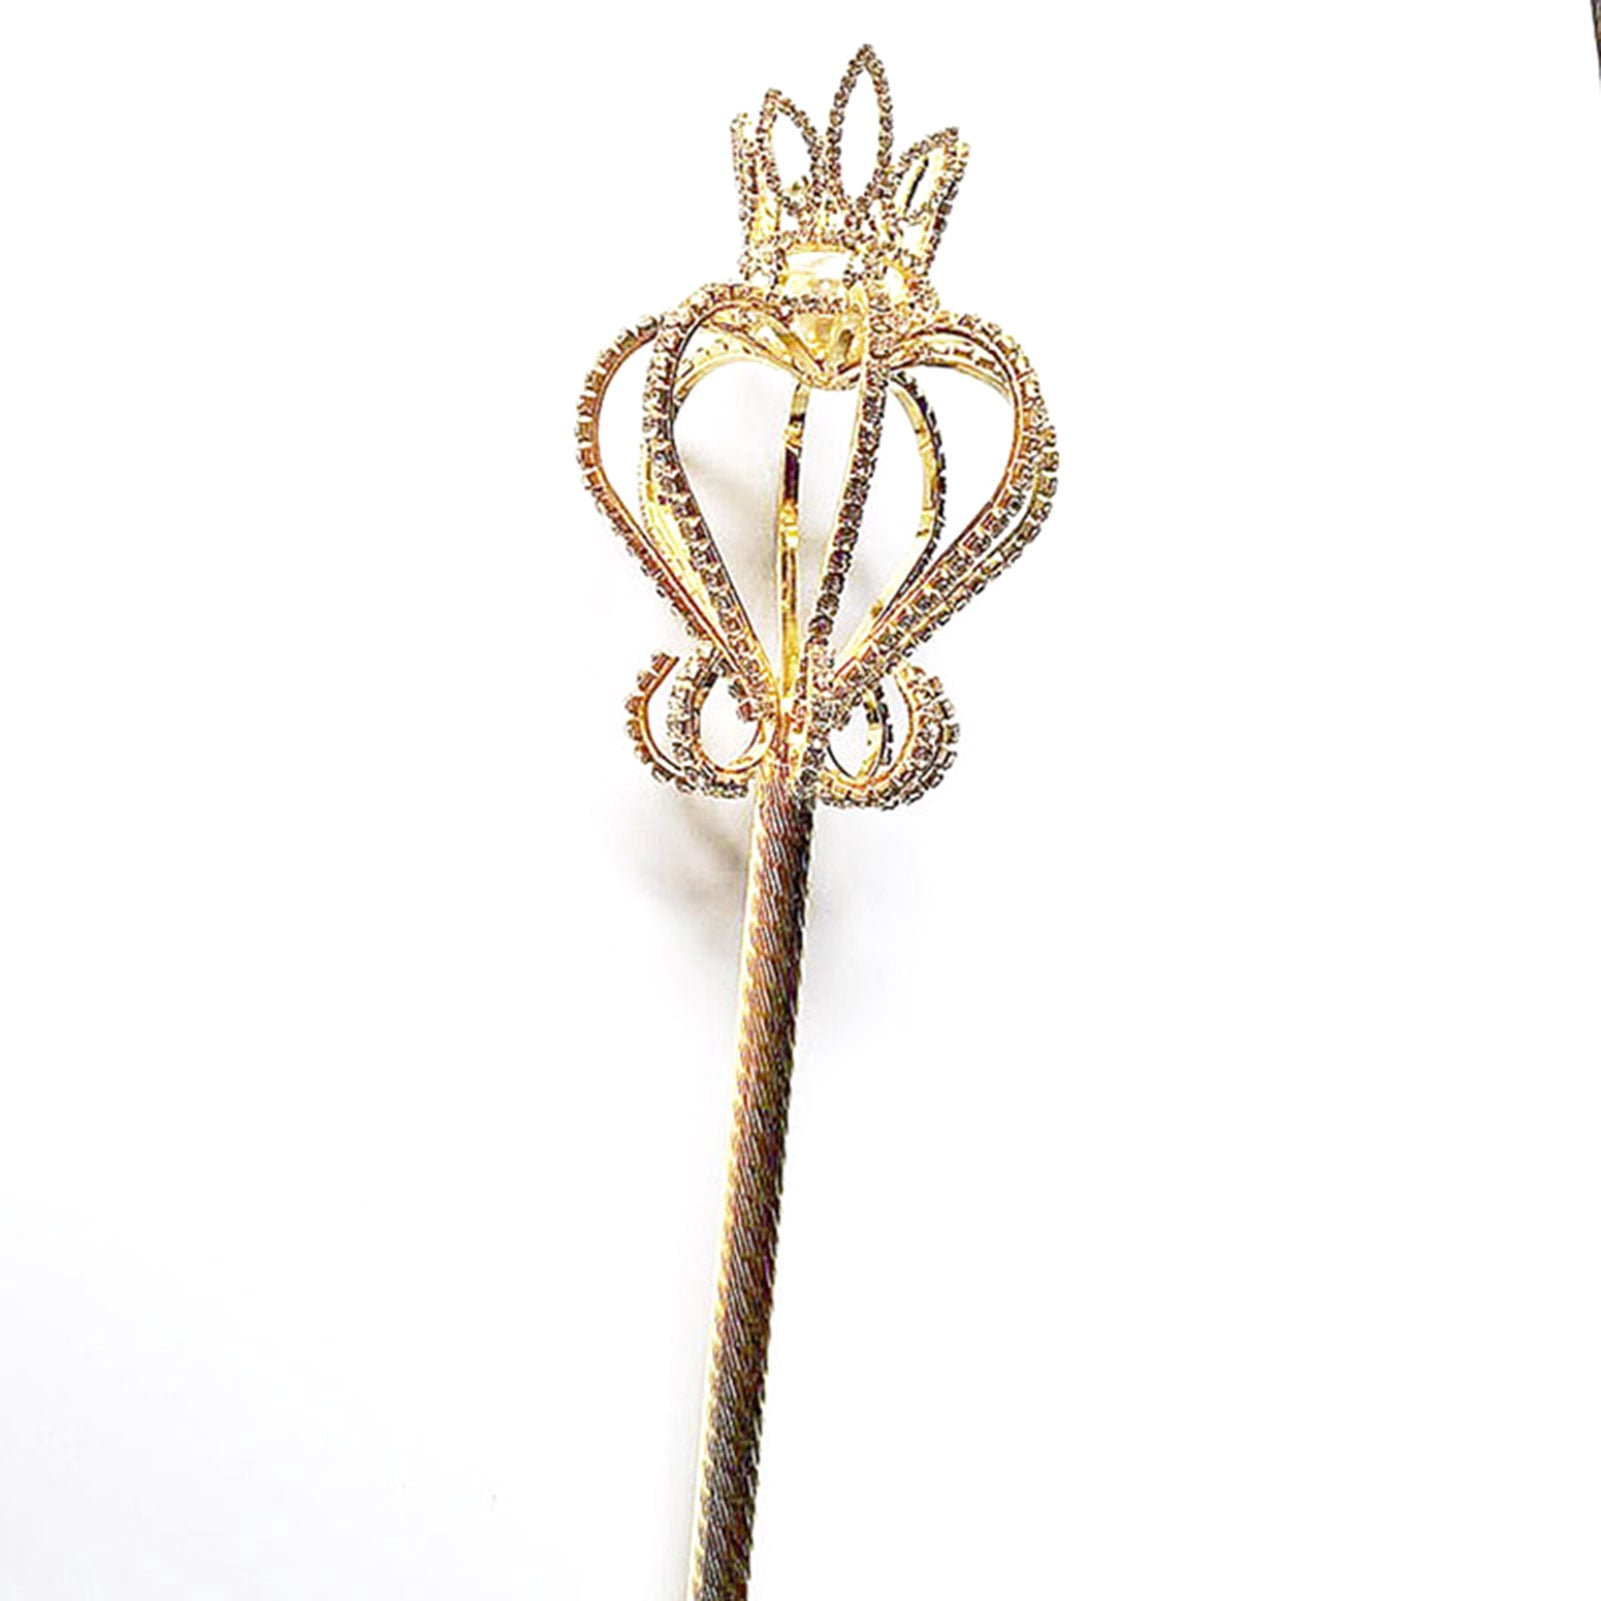 HEART SCEPTER WAND CRYSTAL RHINESTONE NEW MAGIC FAIRY WITCH ROYAL QUEEN PRINCESS 